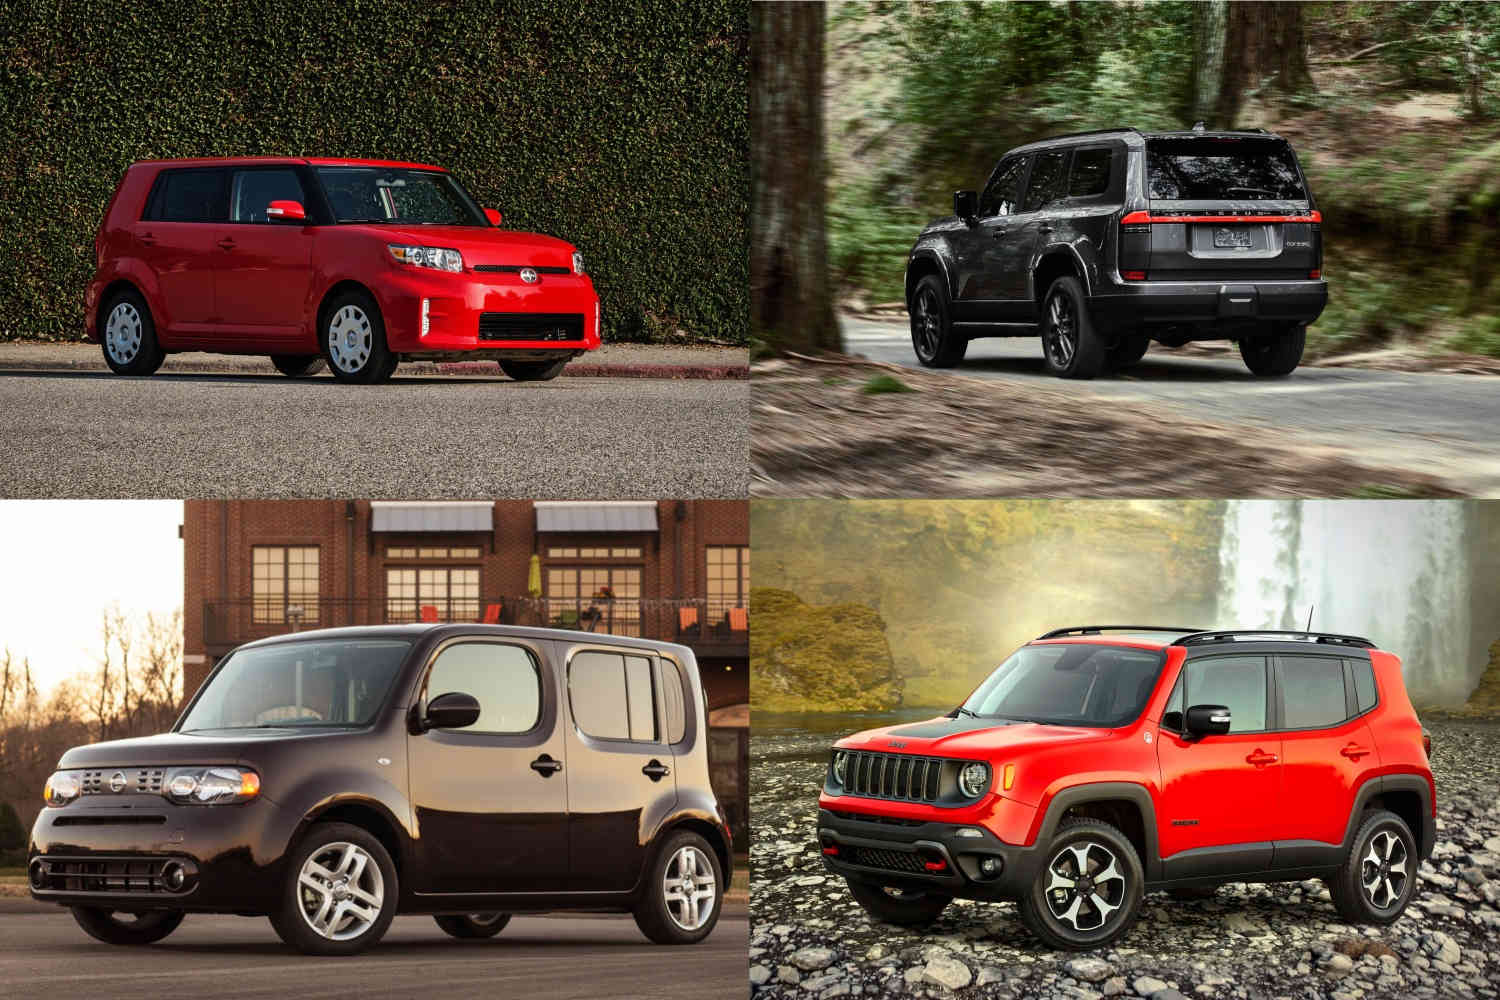 Weird boxy SUVs from Nissan, Toyota, Lexus, and Jeep